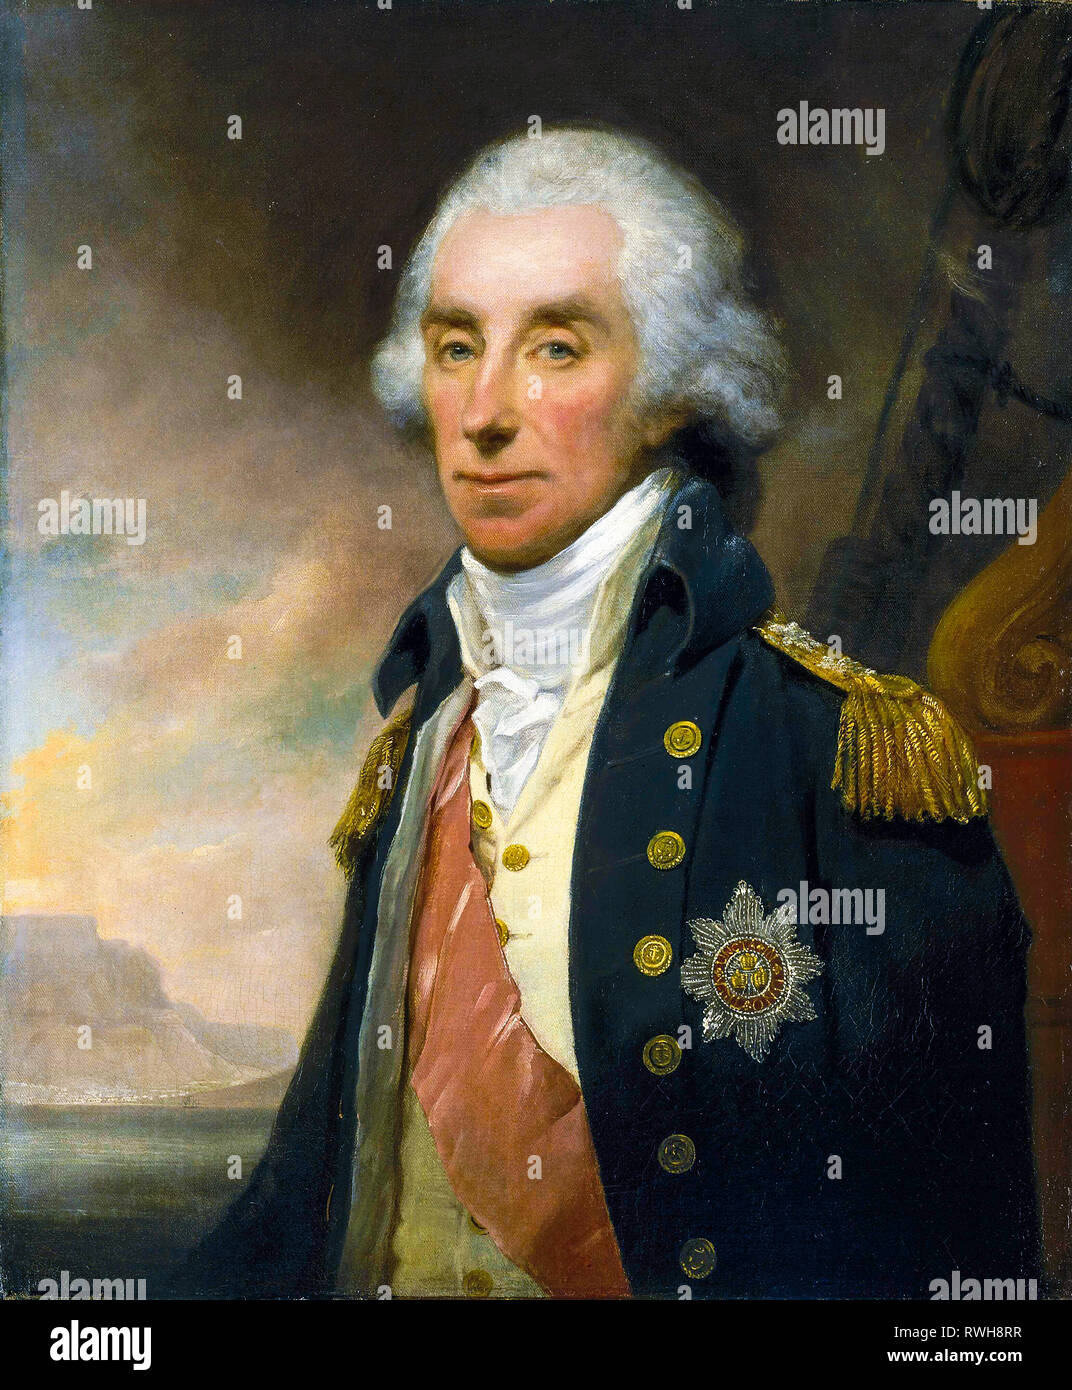 Admiral Lord George Keith Elphinstone, 1st Viscount Keith (1746-1823), portrait painting, c. 1799 by William Owen Stock Photo